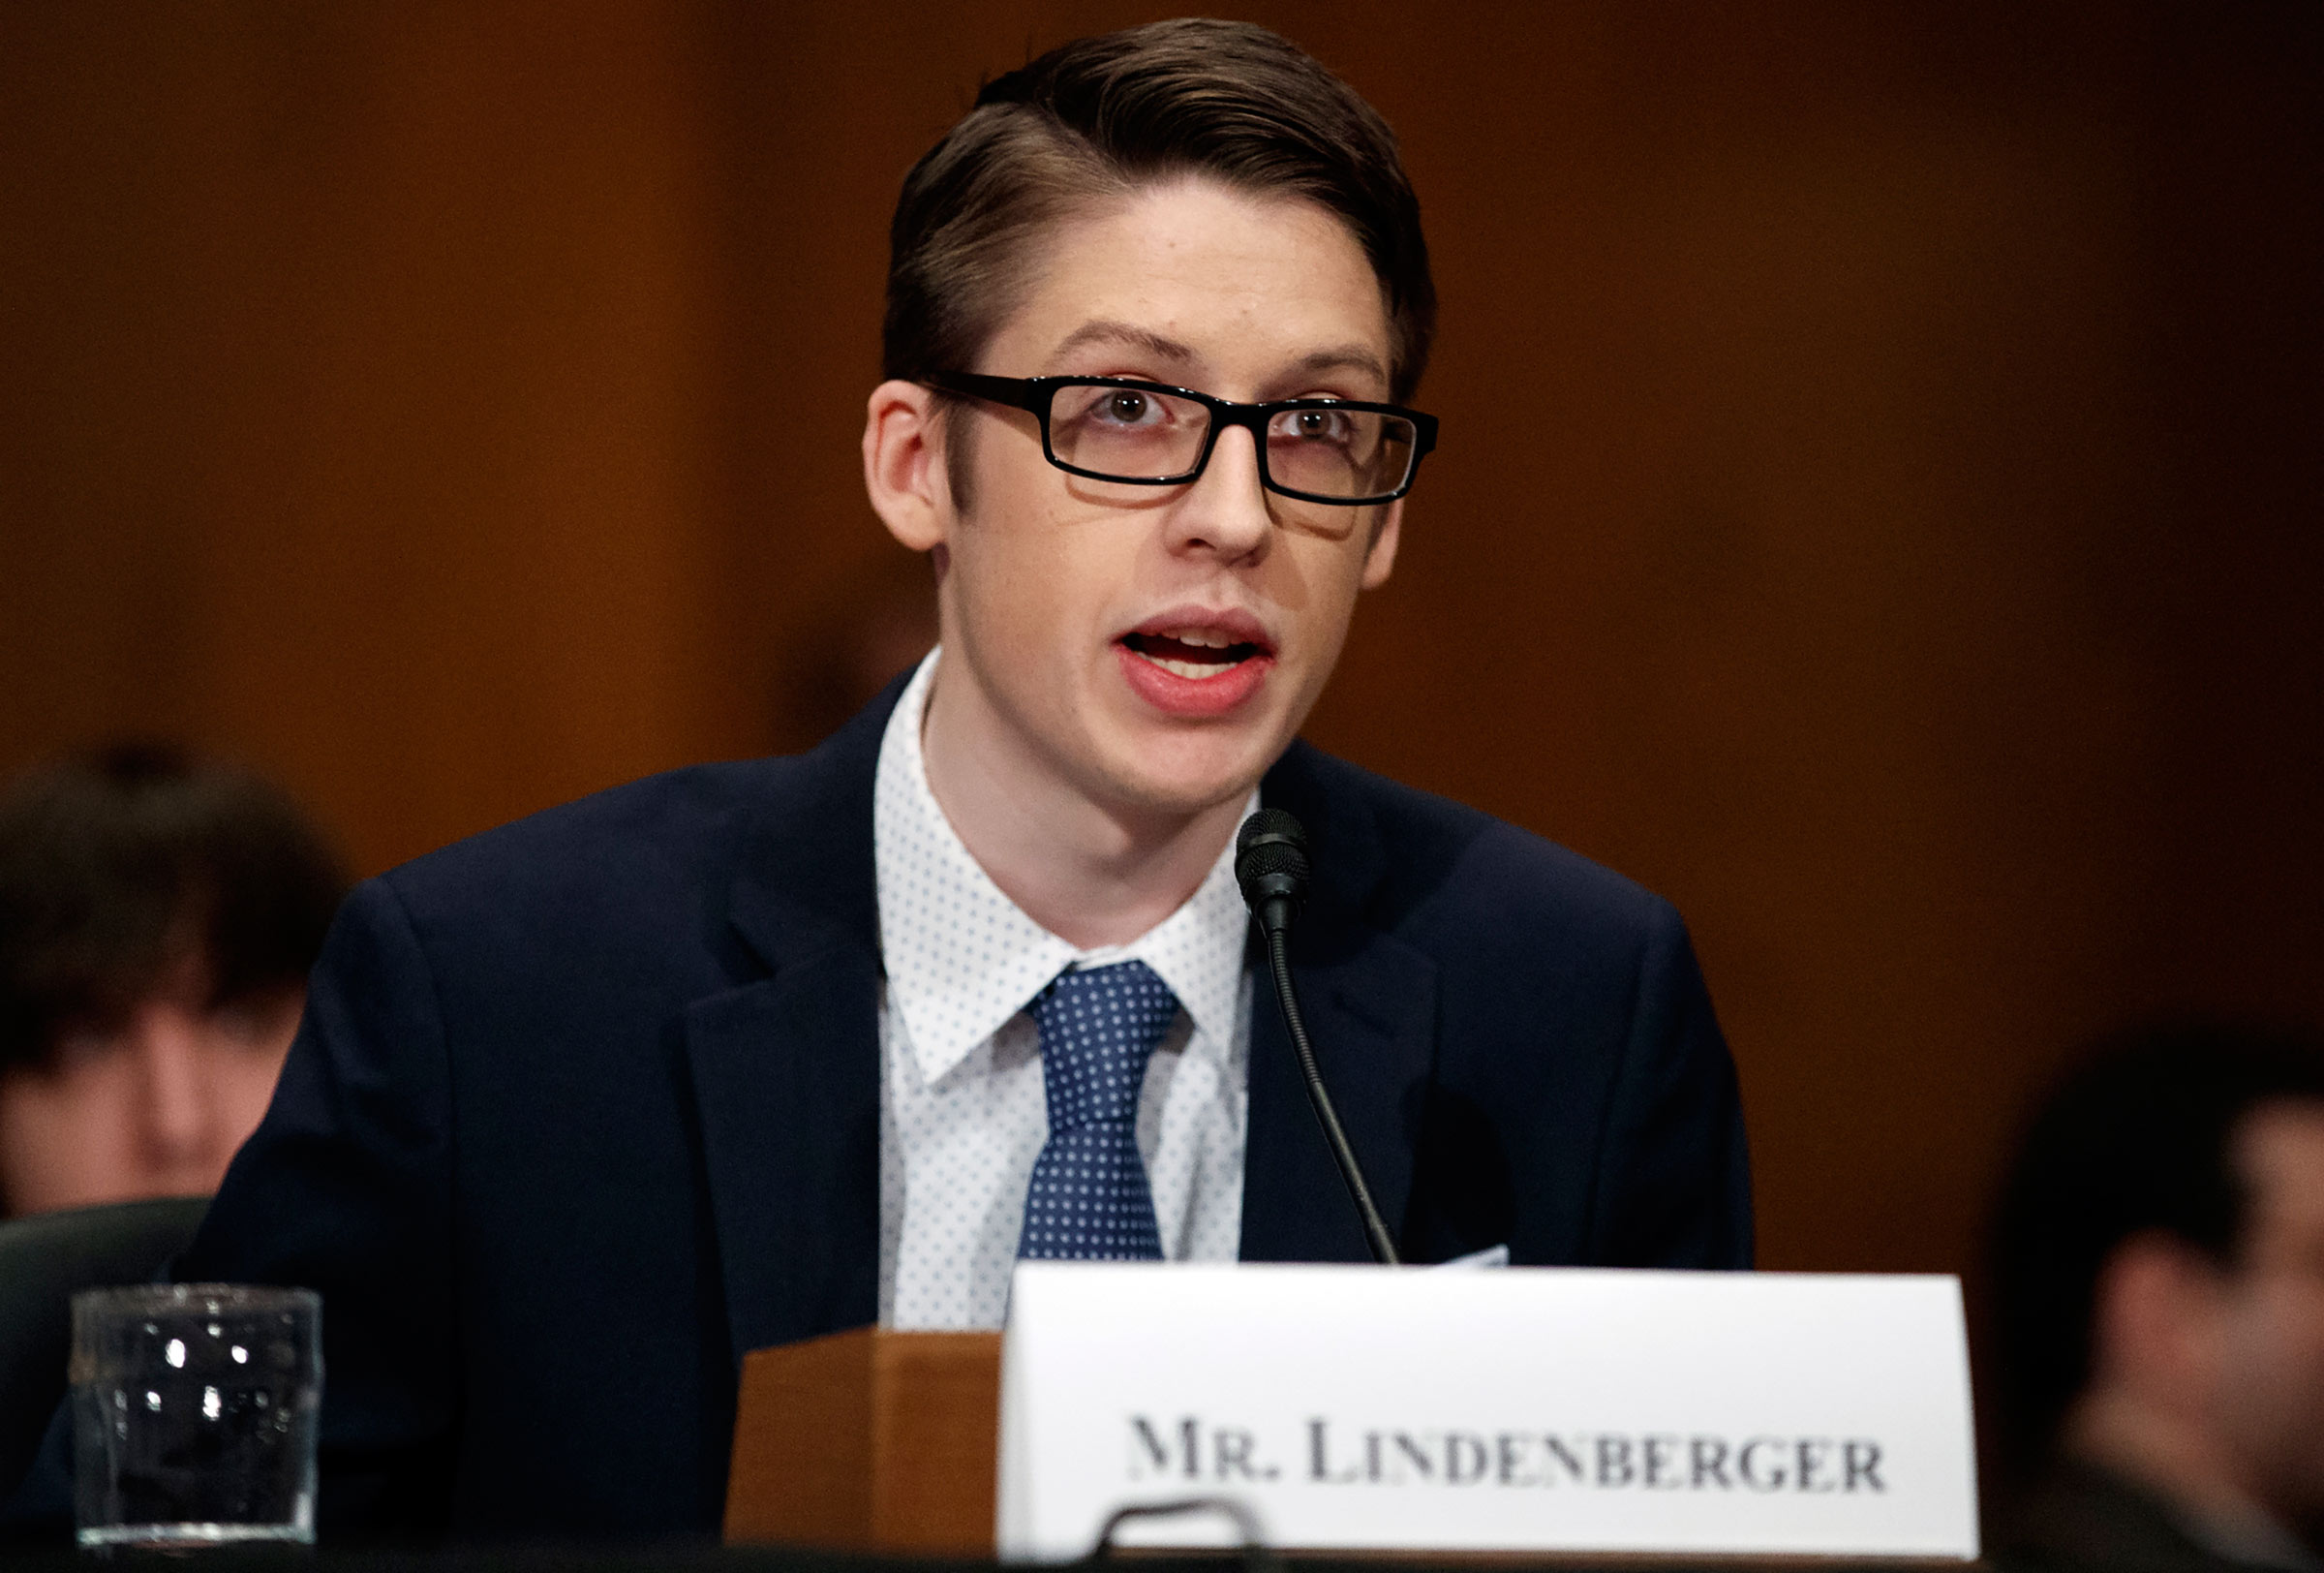 Ethan Lindenberger, 18, testifies before a Senate committee about getting ­vaccinated against his parents’ wishes on March 5.